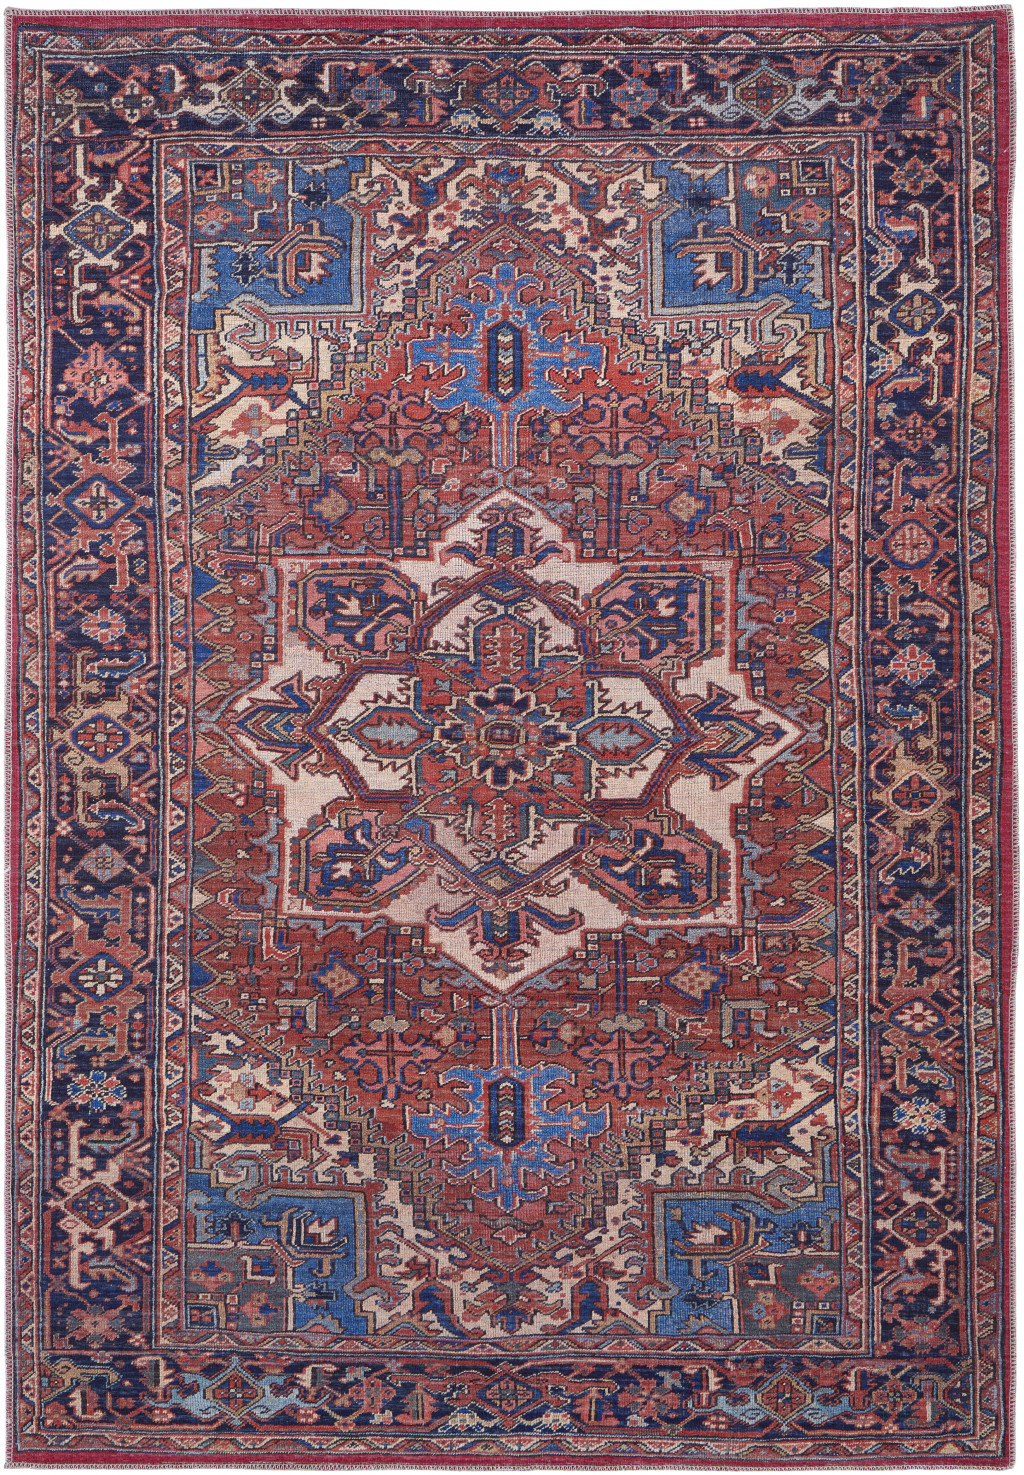 2' X 3' Red Tan And Blue Floral Power Loom Area Rug-515118-1